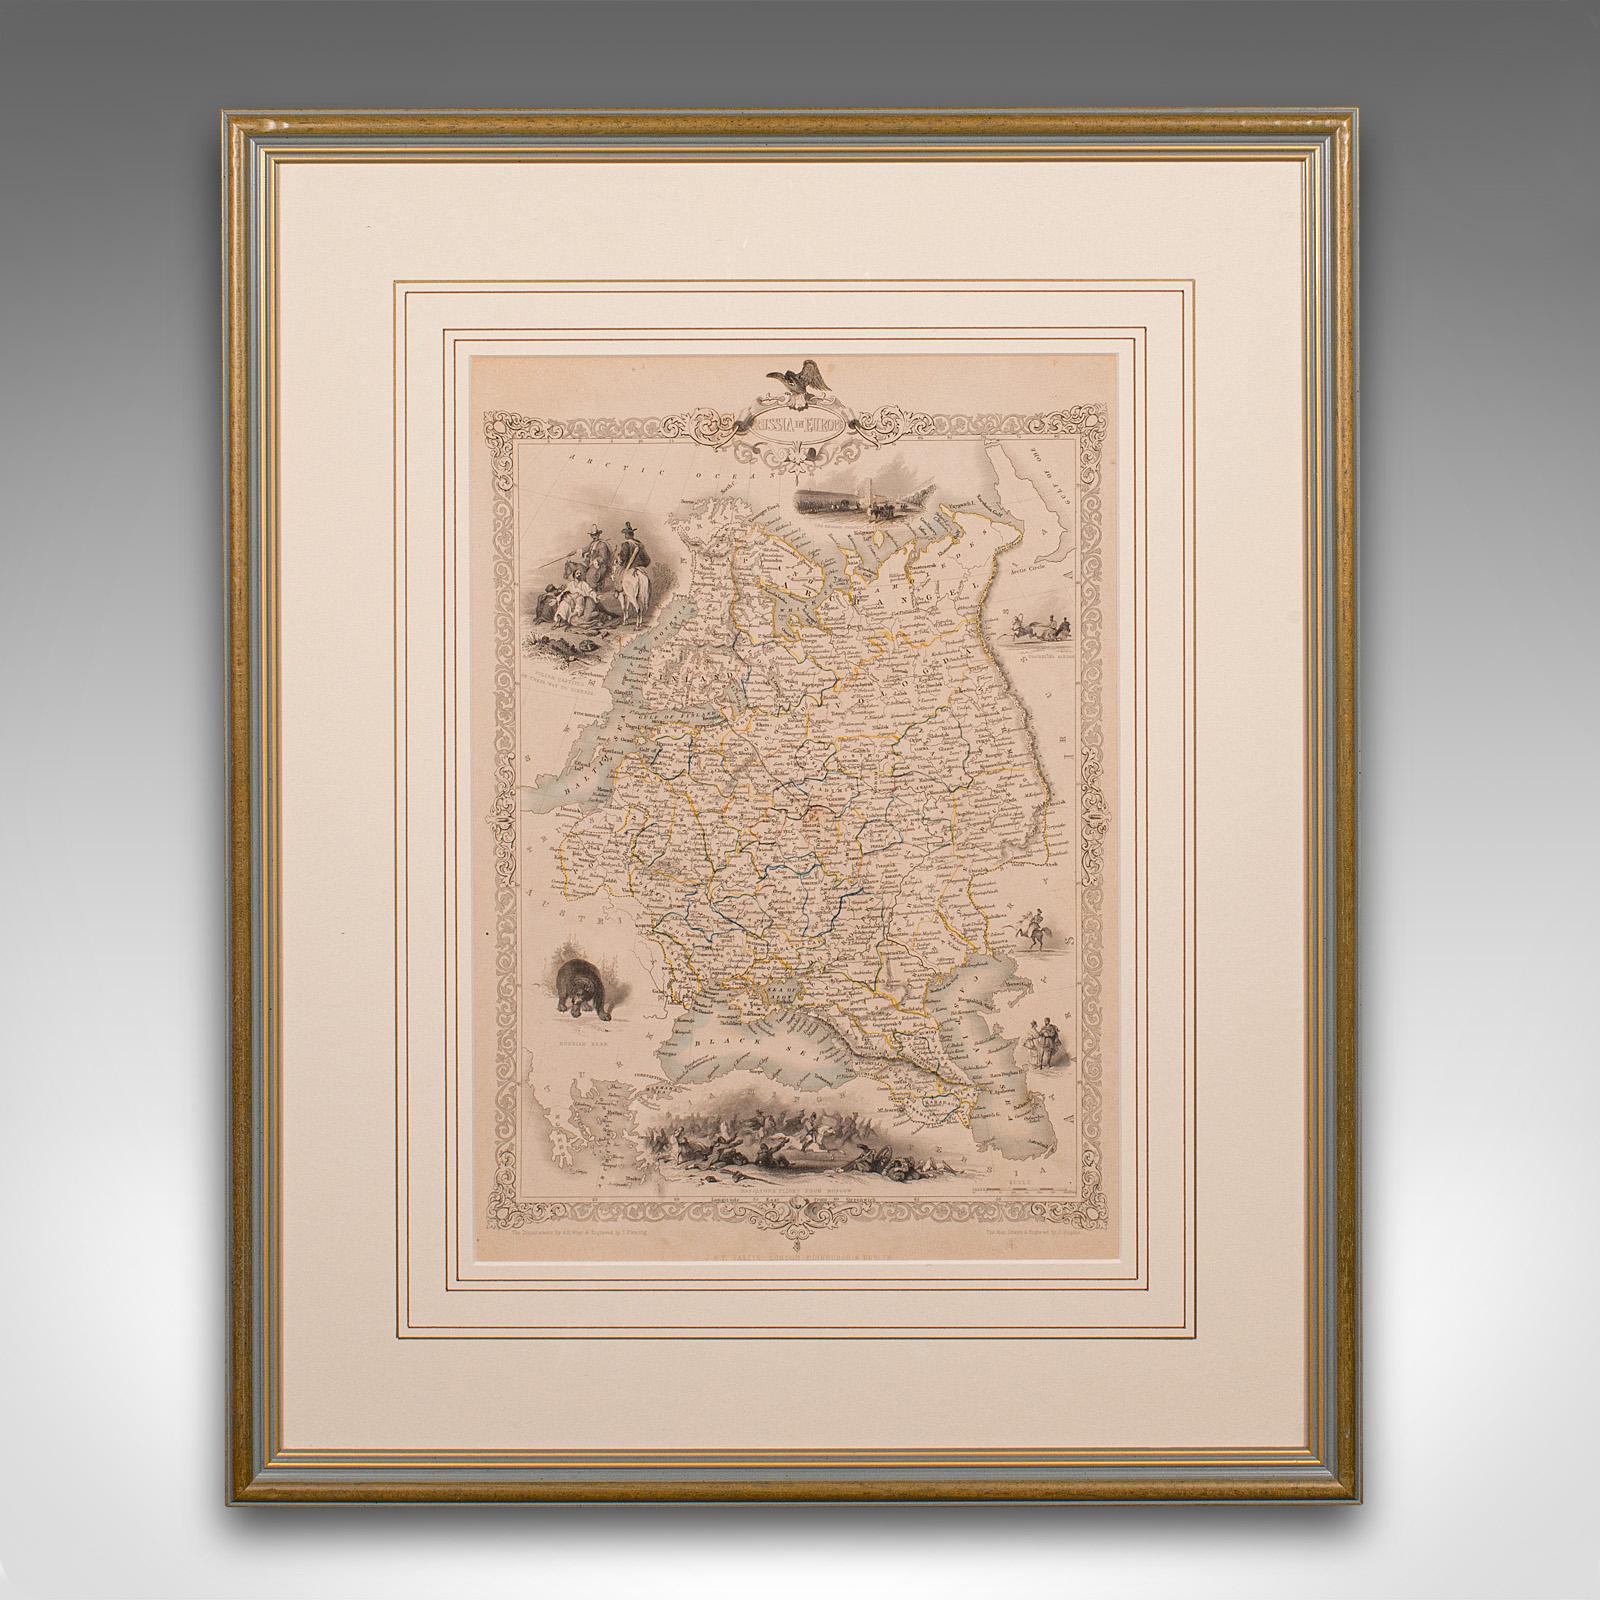 This is an antique lithography map of Western Russia. An English, framed atlas engraving of cartographic interest by John Rapkin, dating to the early Victorian period and later, circa 1850.

John Rapkin was considered as one of the best map makers